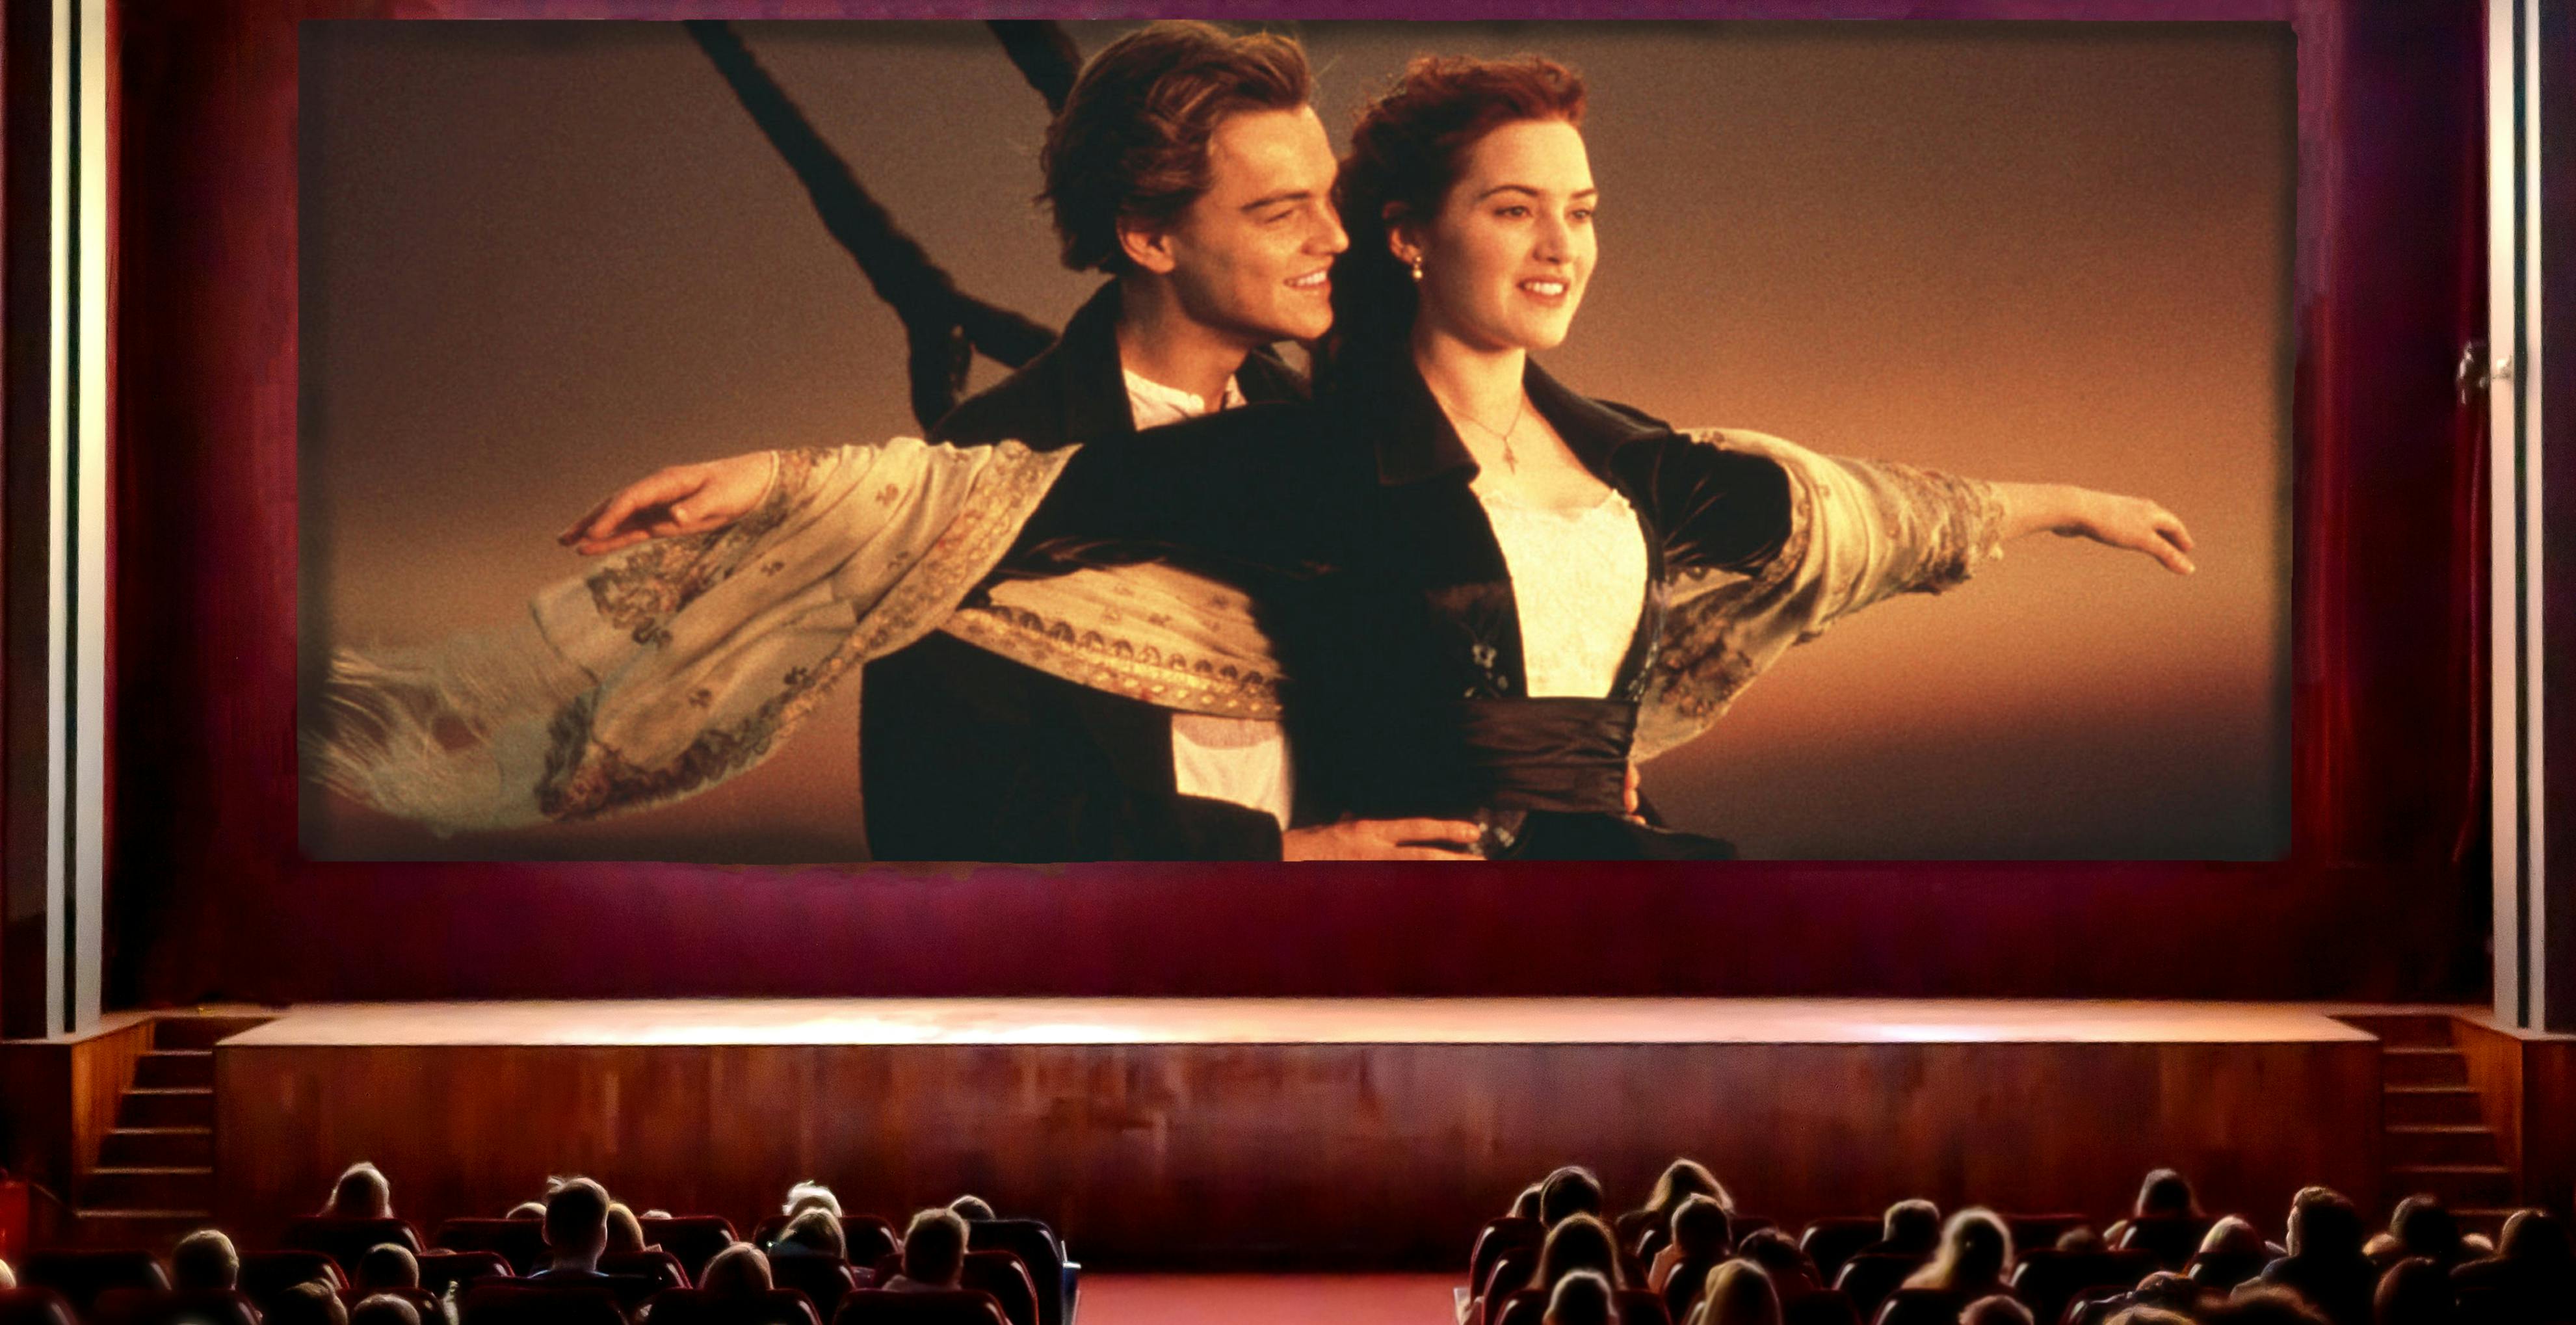 Grab the Tissues: The Titanic Movie Returns to Theaters Feb. 9